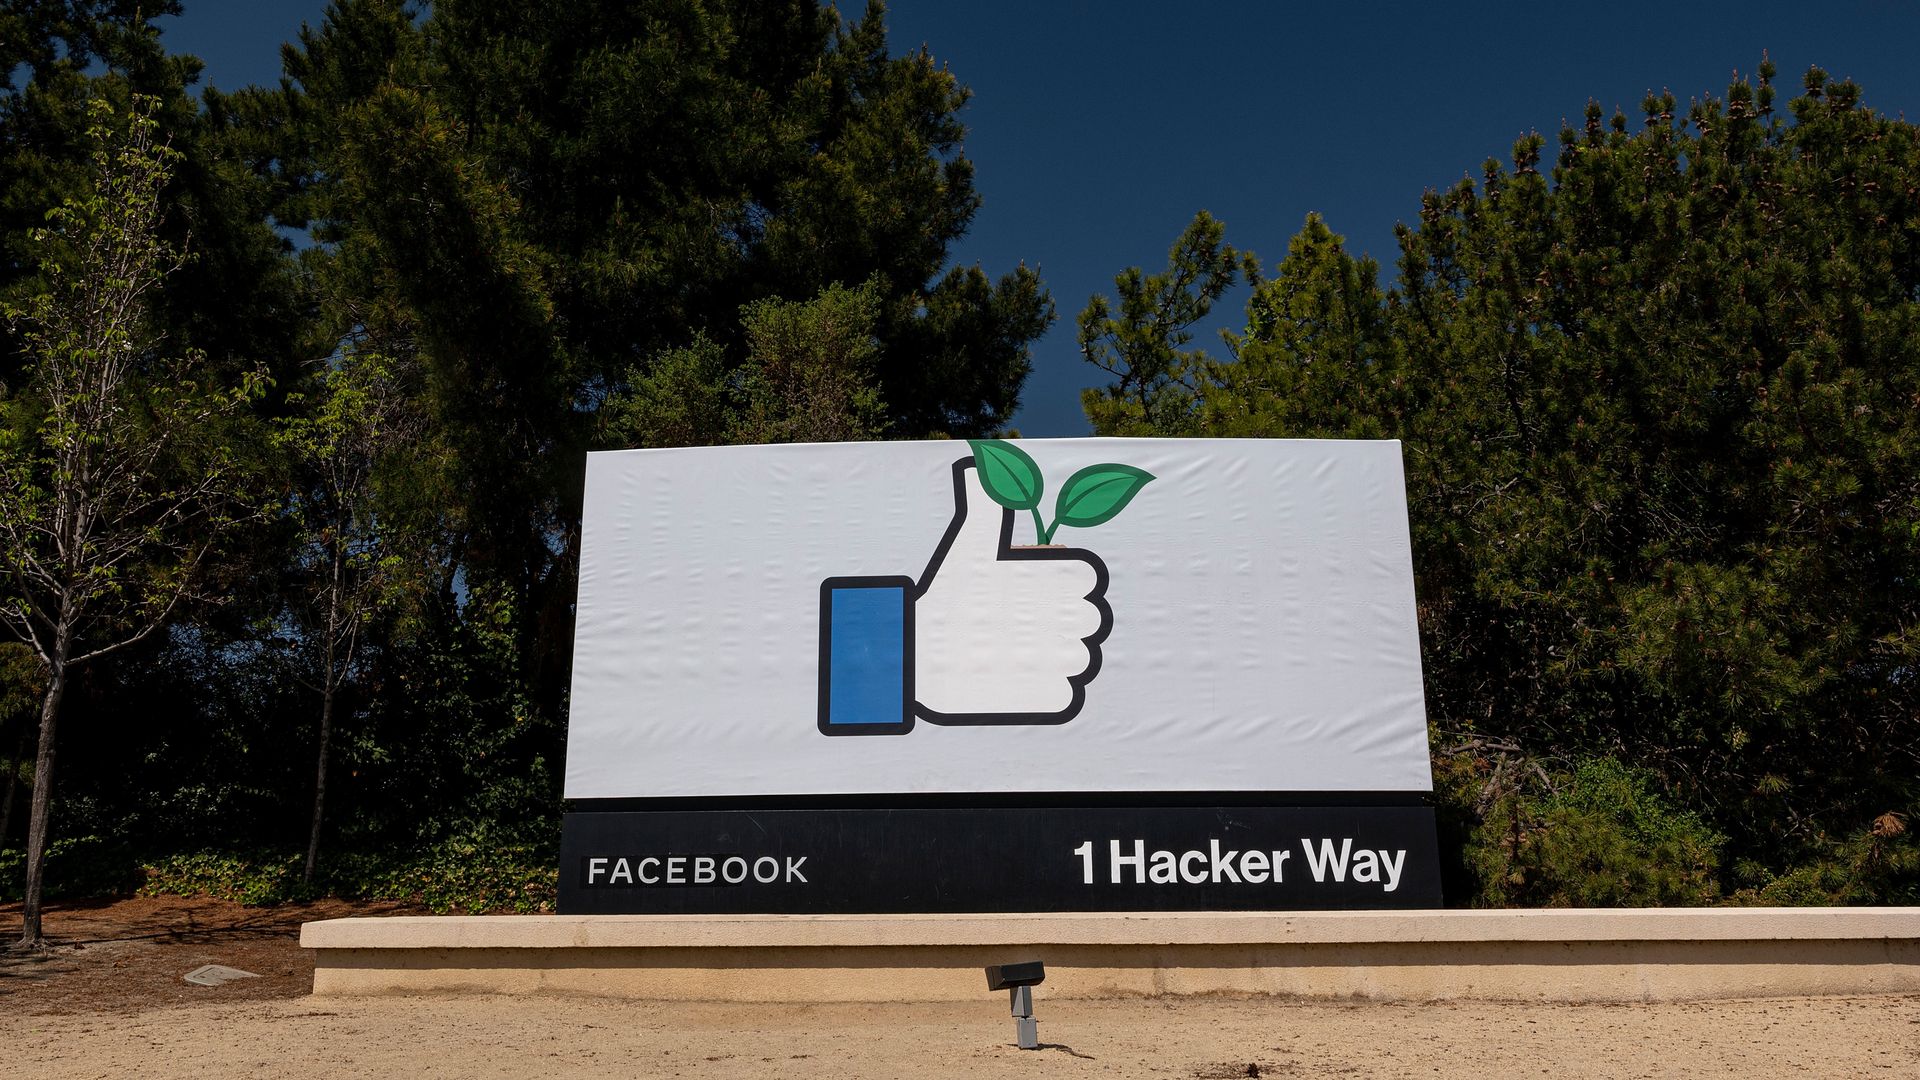 Photo of the main entrance of the Facebook headquarters, with a large sign that shows the Facebook thumbs up emoji